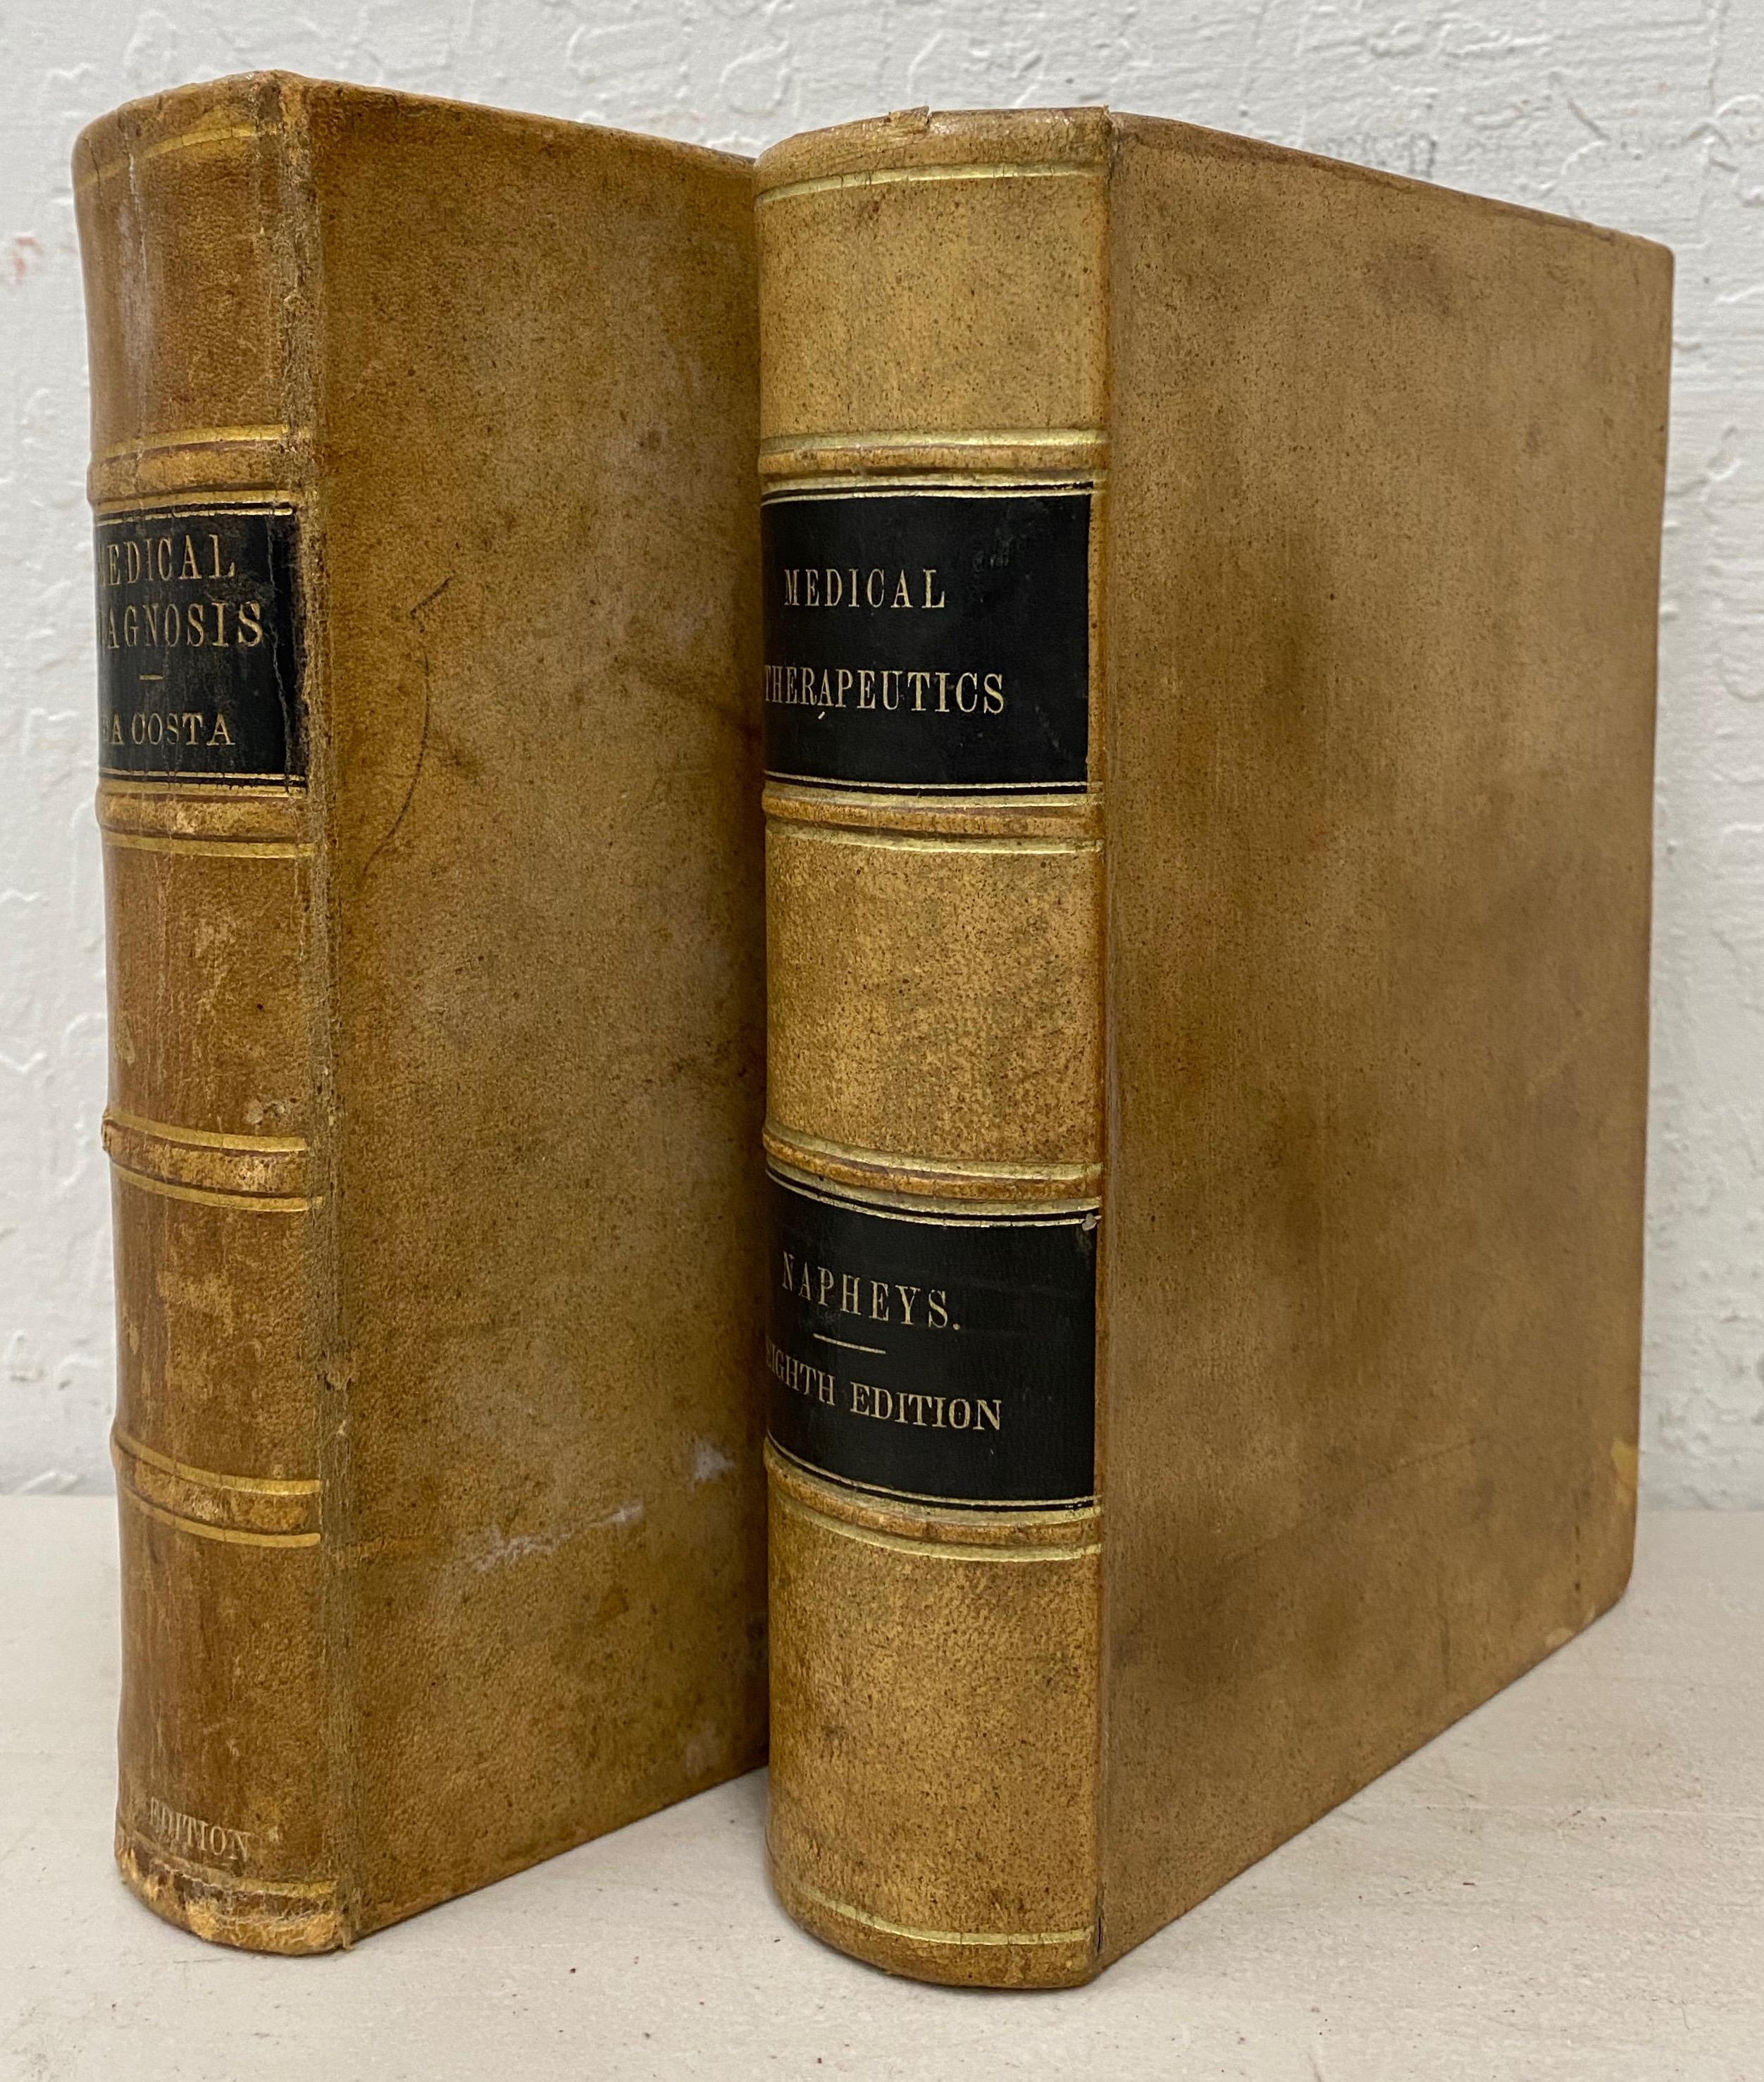 Pair of leather bound antique medical books, circa 1880s

Medical Diagnosis by Da COSTA and Medical Therapeutics by Napheys

Each book is in very good antique condition.

Approximate dimensions: 9